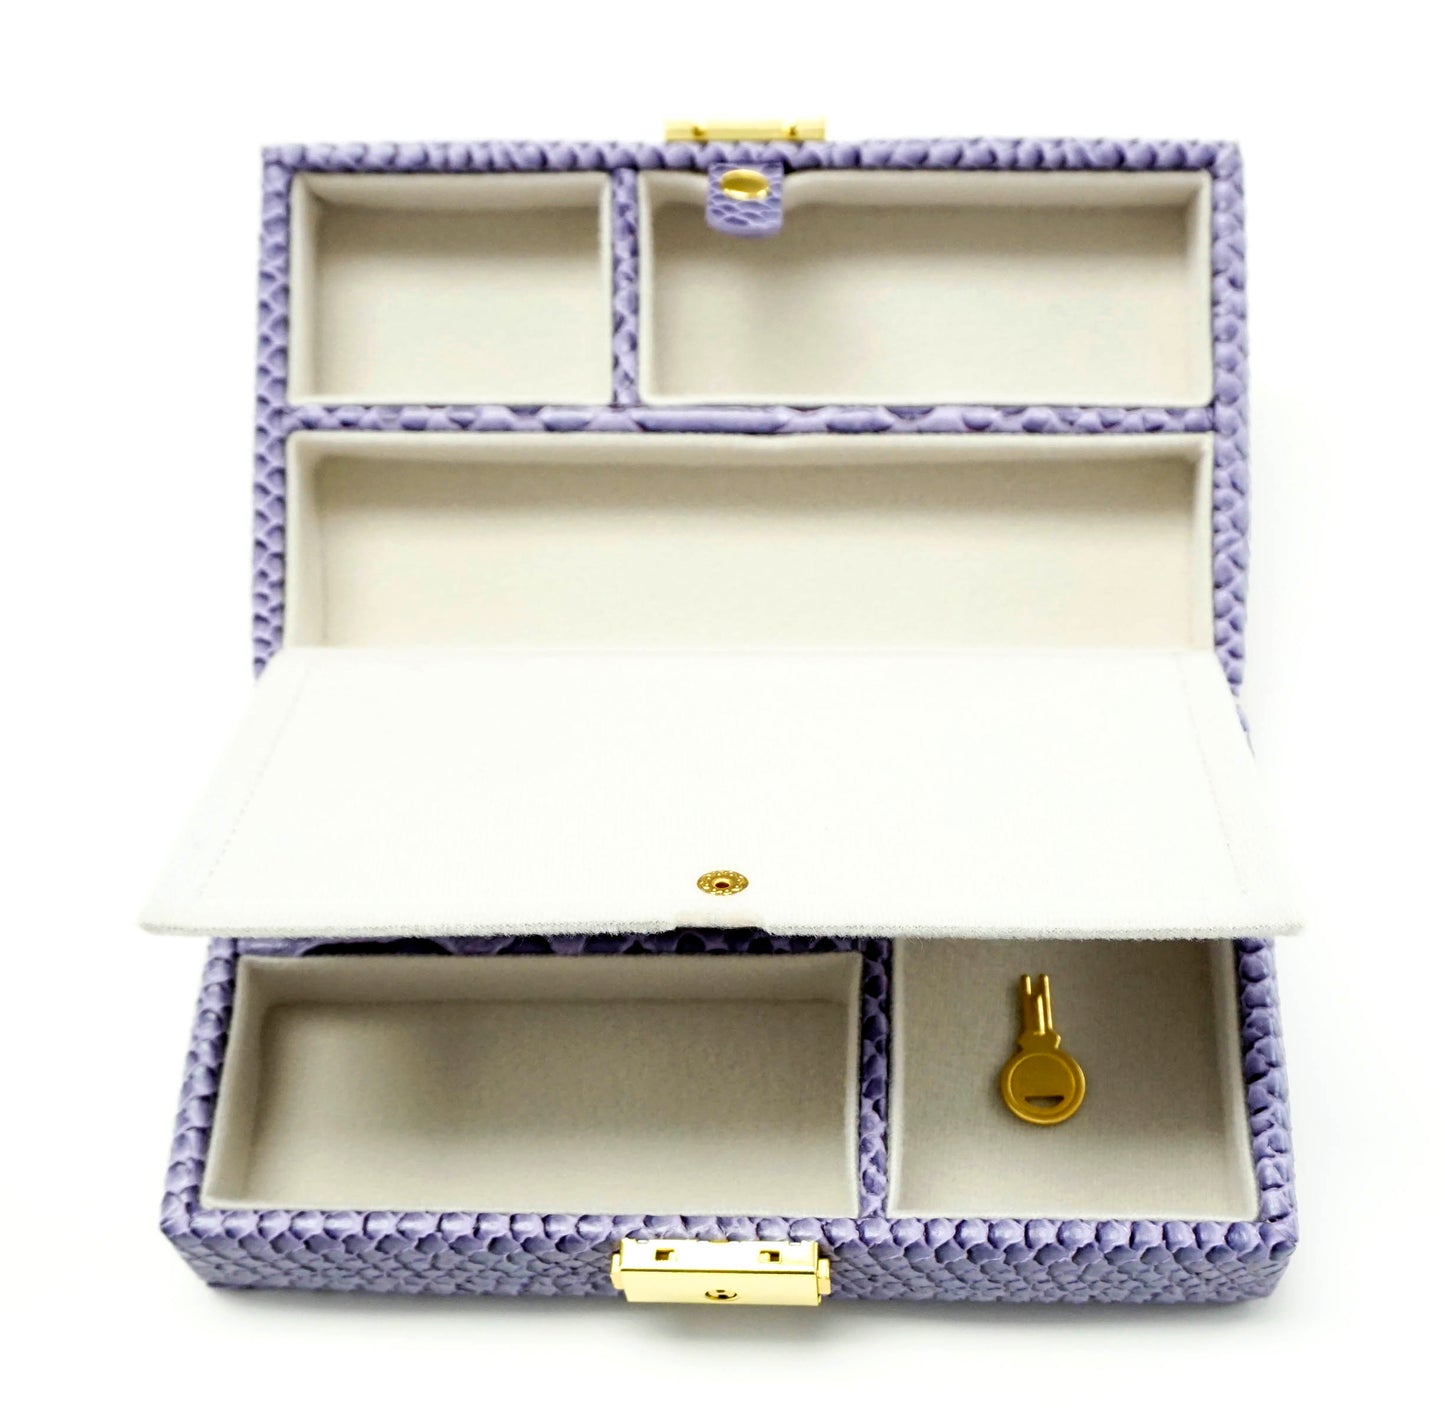 Leather Jewelry Box ~ Purple Leather Jewelry Box with Interior Compartments for Needlepoint Canvas LEE